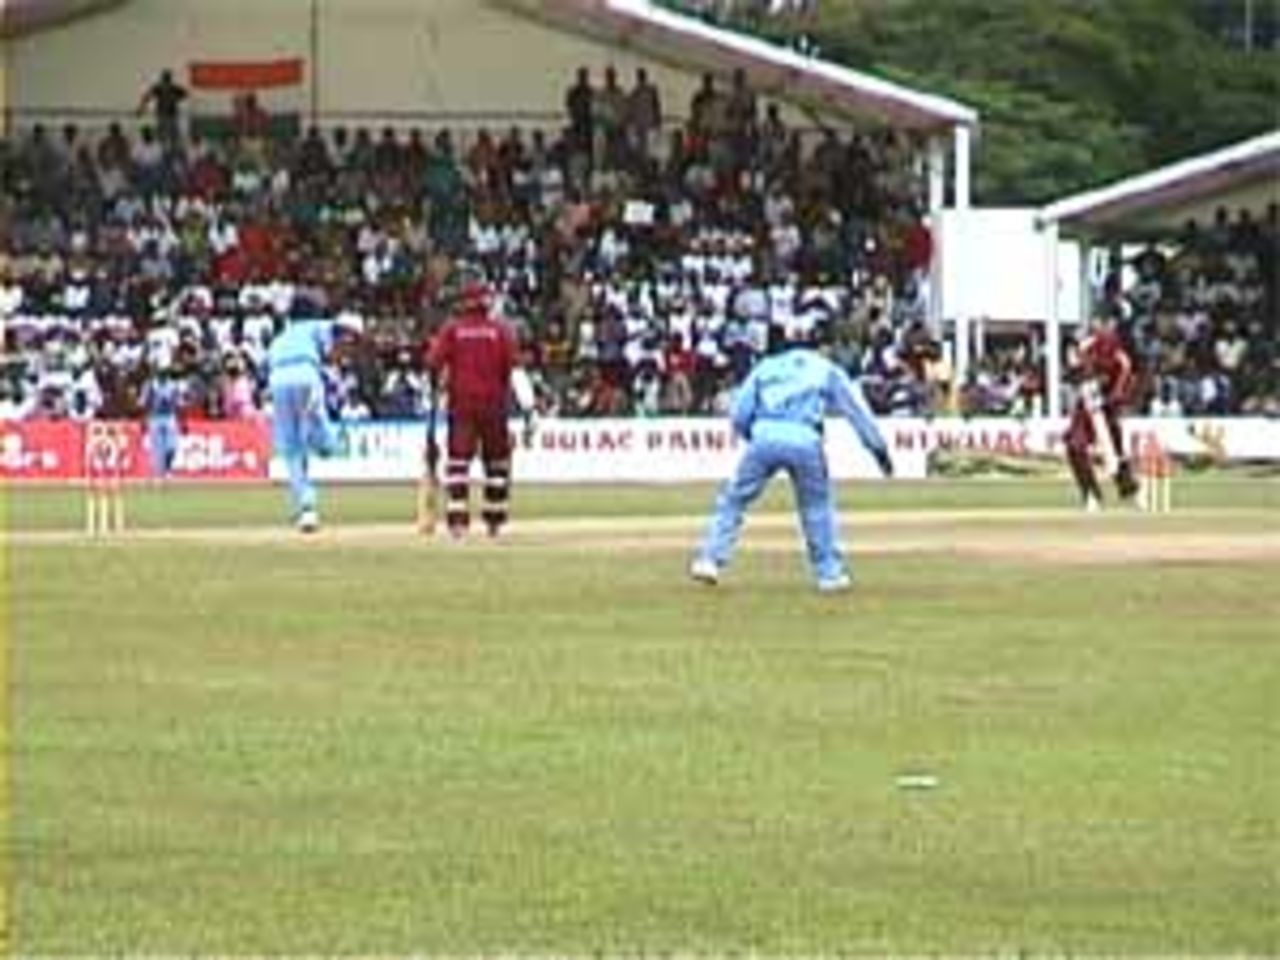 Chanderpual defends, India v West Indies (3rd ODI), Coca-Cola Singapore Challenge, 1999-2000, Kallang Ground, Singapore, 5 Sep 1999.